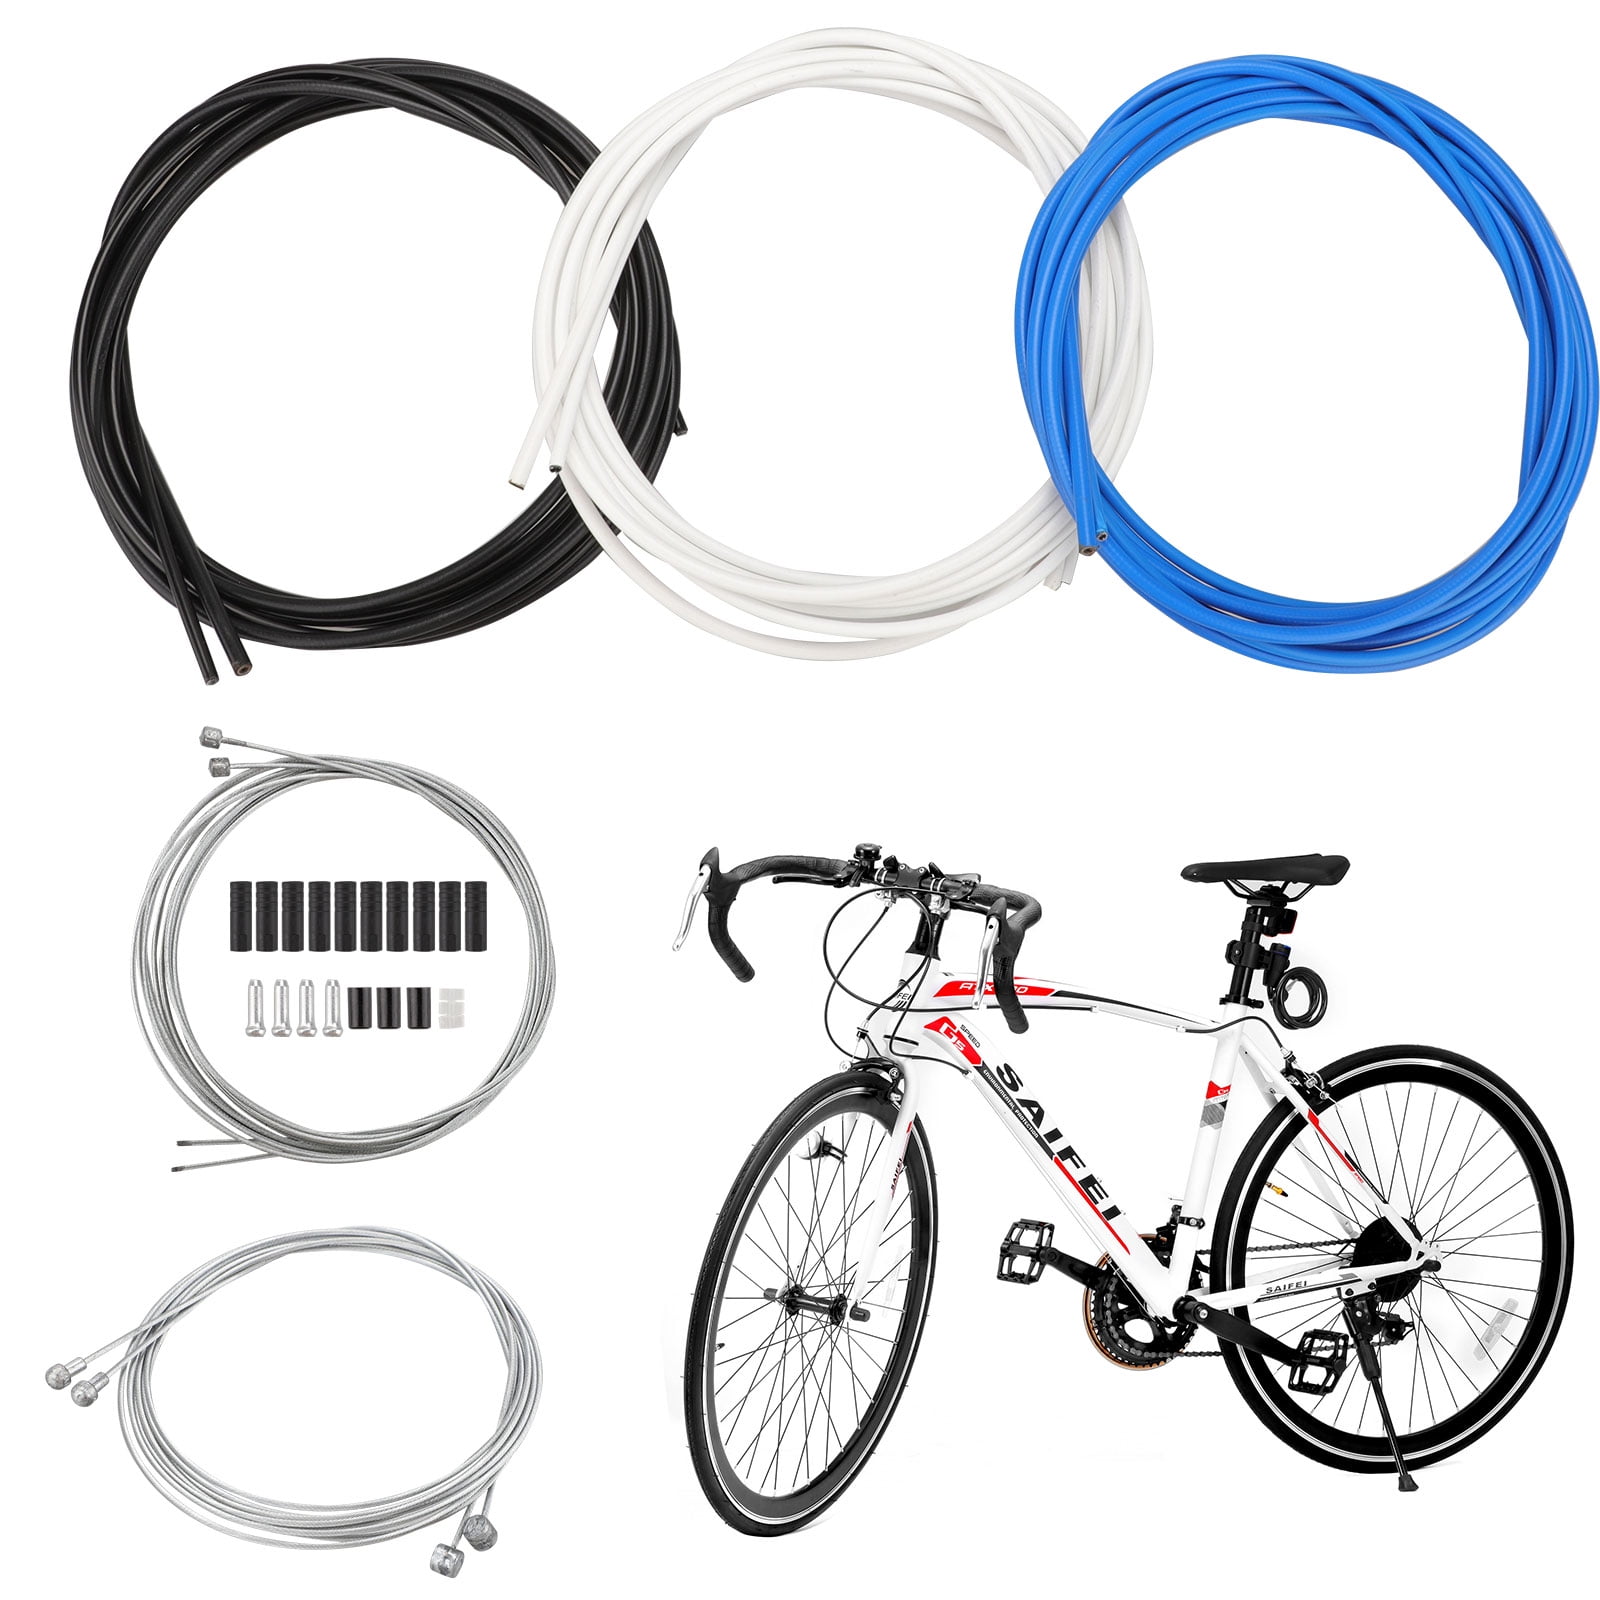 Stainless Steel Cycling Road Cable kit Brake Gear inner cables,Donuts Crimps